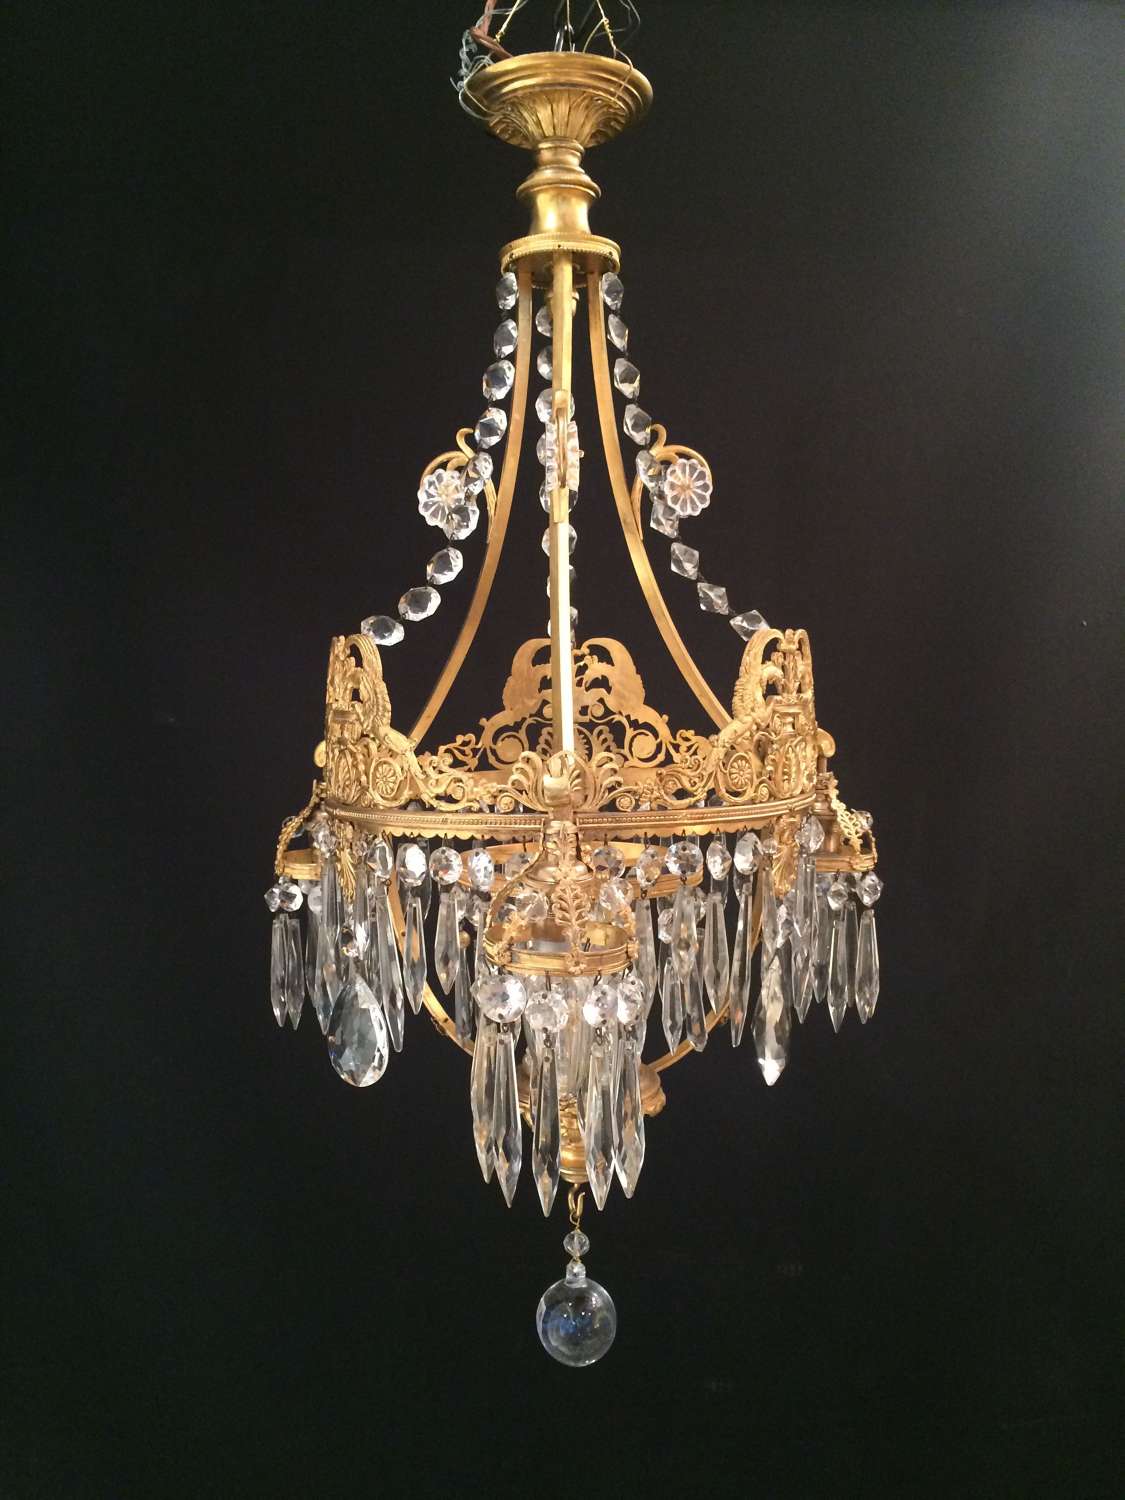 An unusual cut glass and gilt chandelier